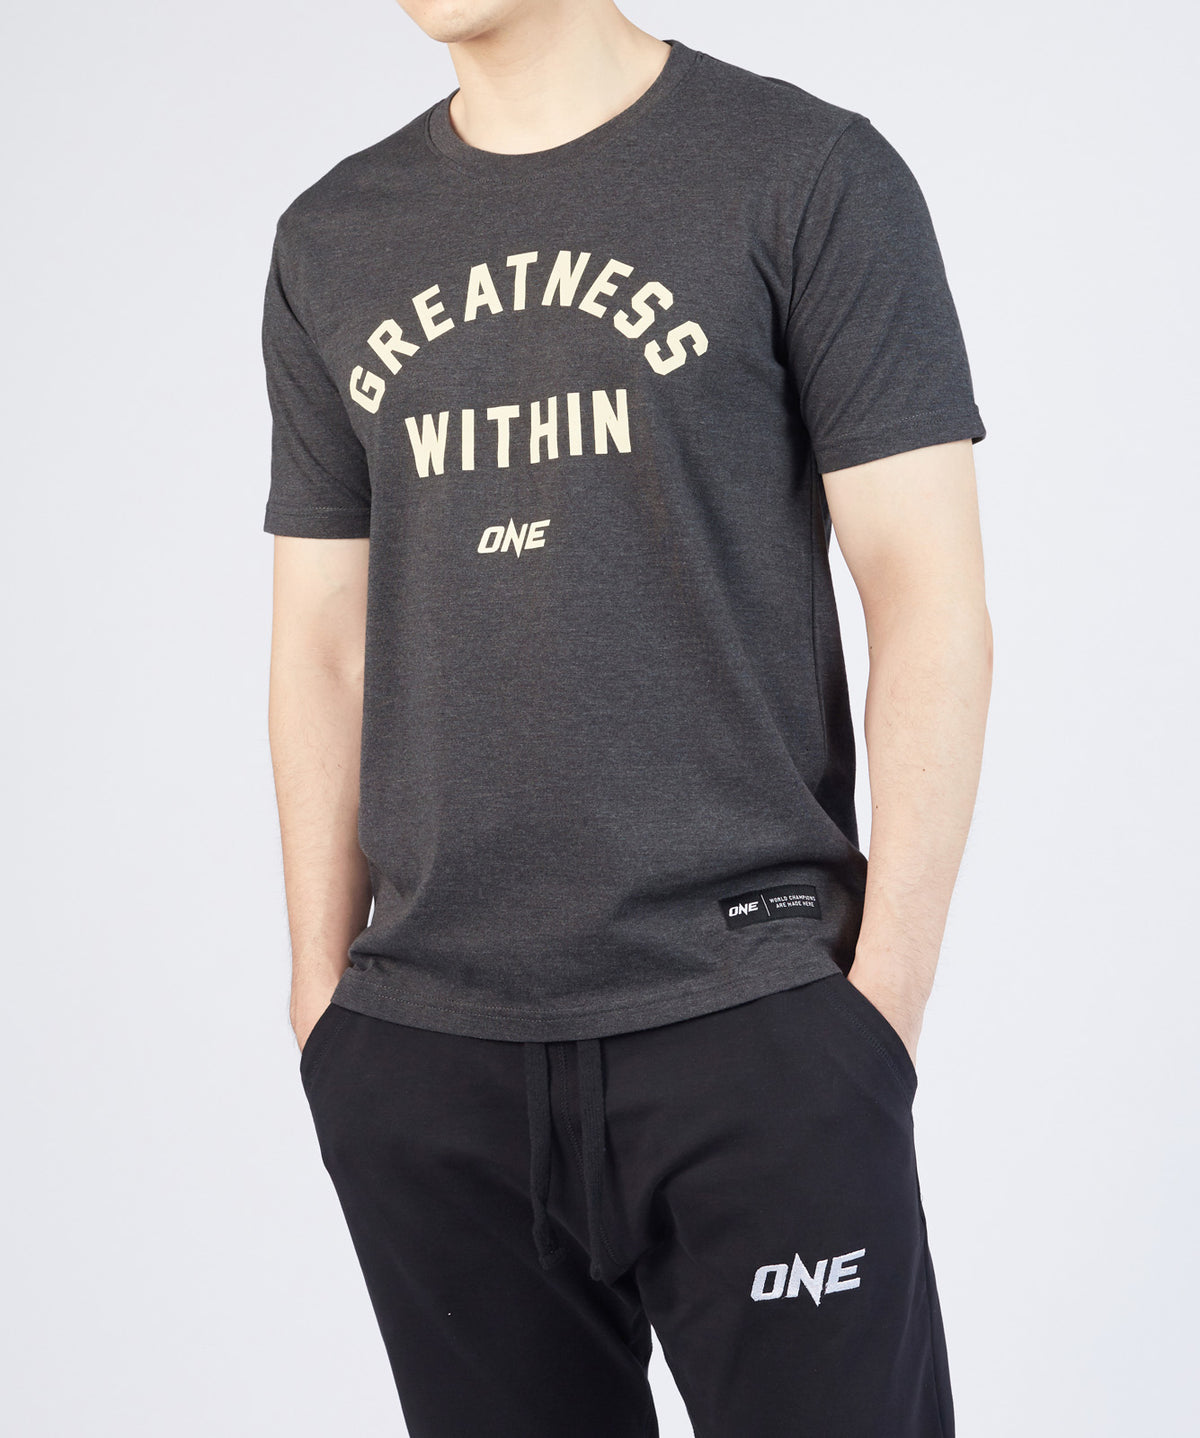 Greatness Within Tee - ONE.SHOP | The Official Online Shop of ONE Championship